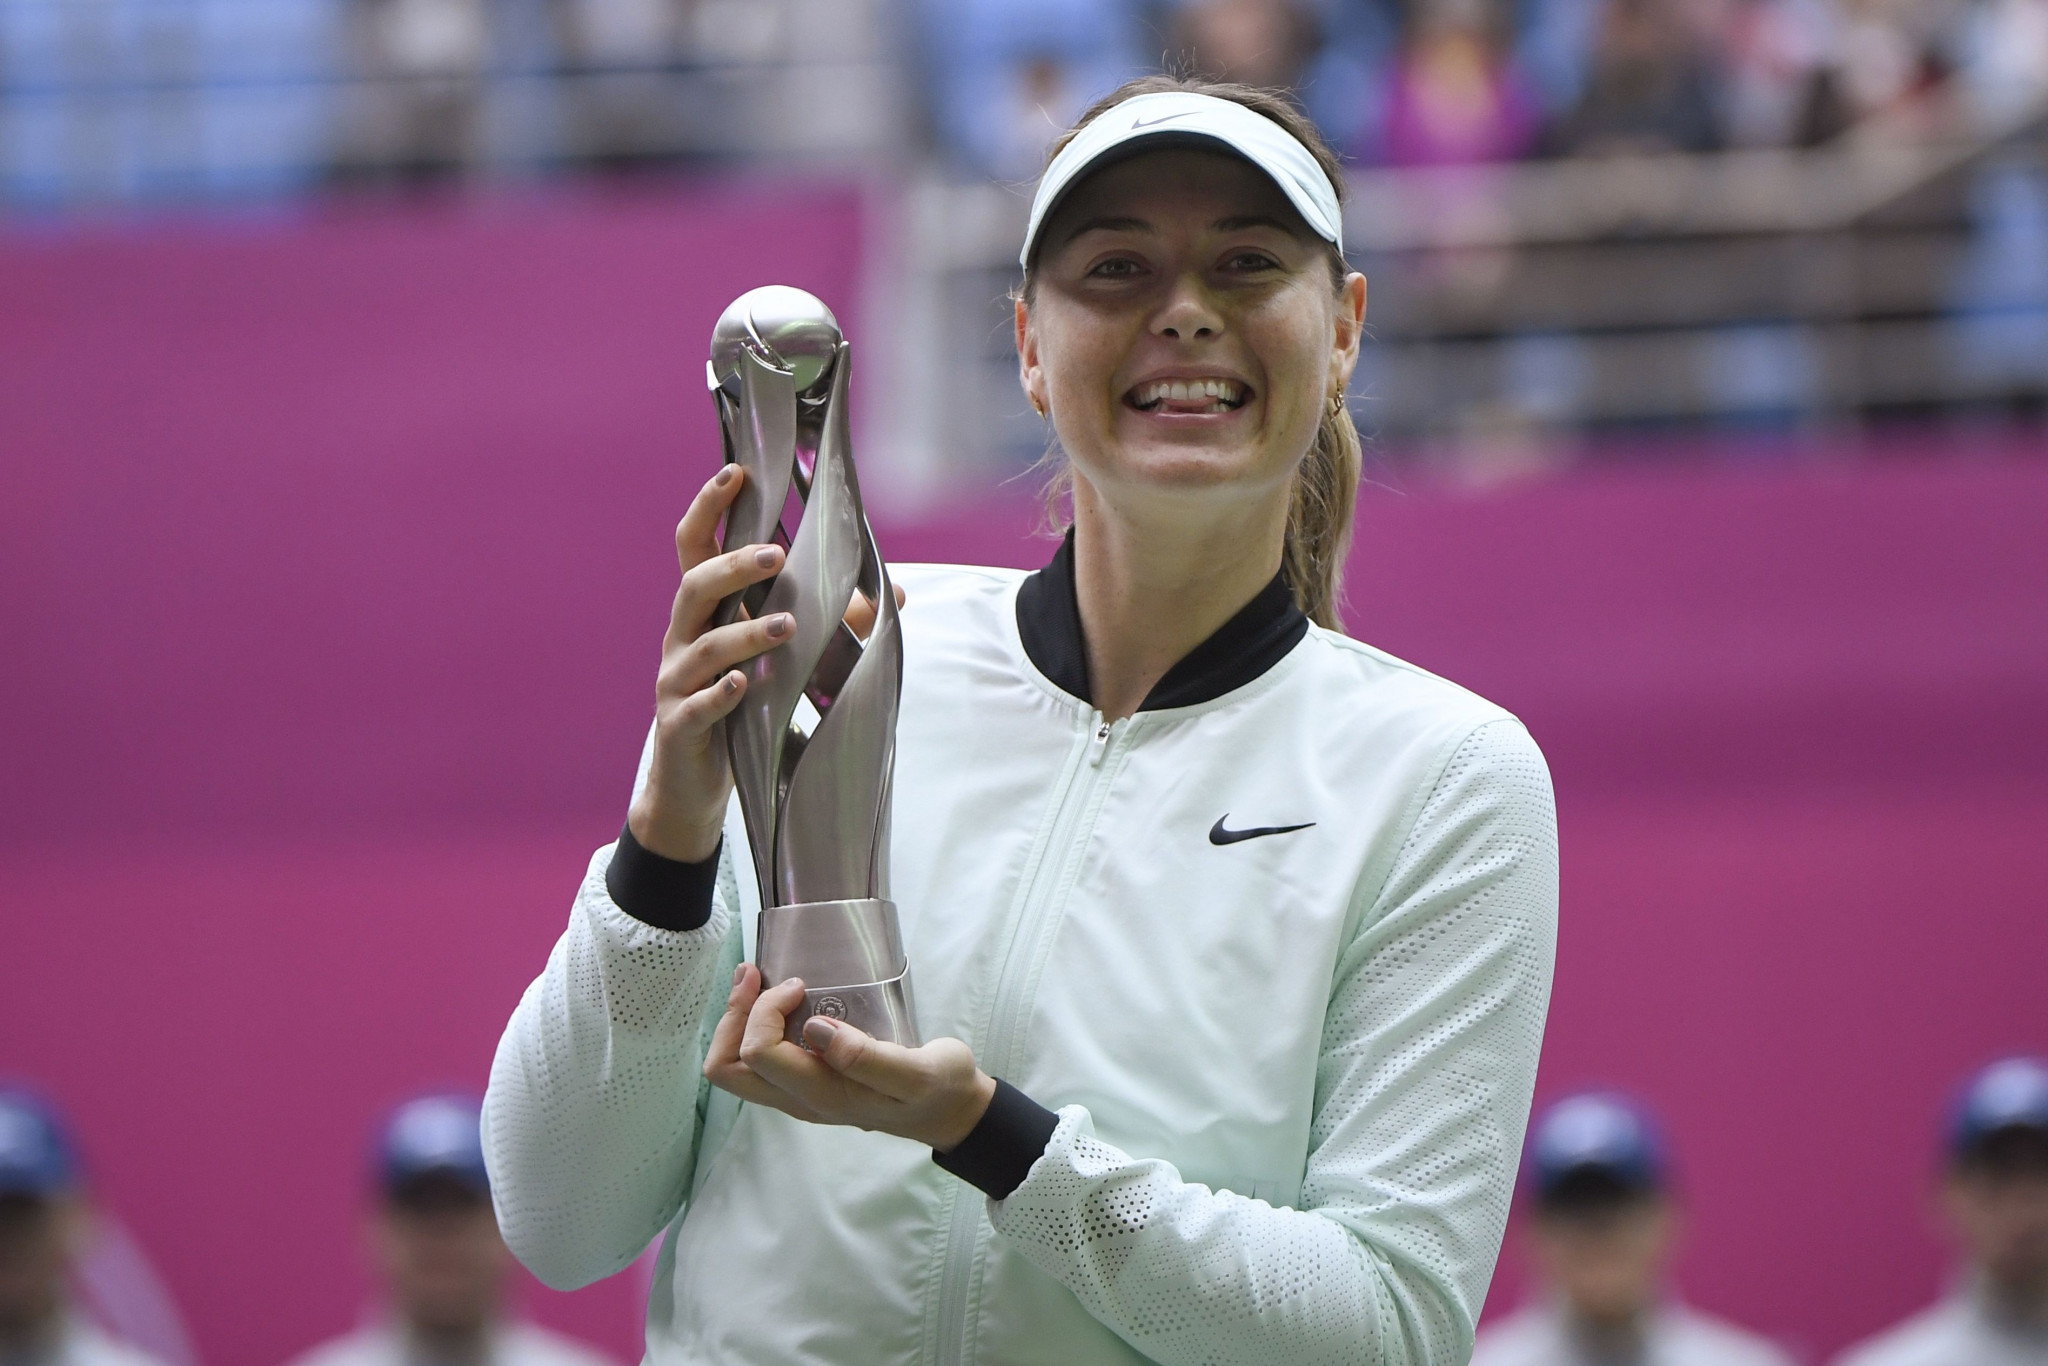 Maria Sharapova has won her first title since May 2015 ©Getty Images